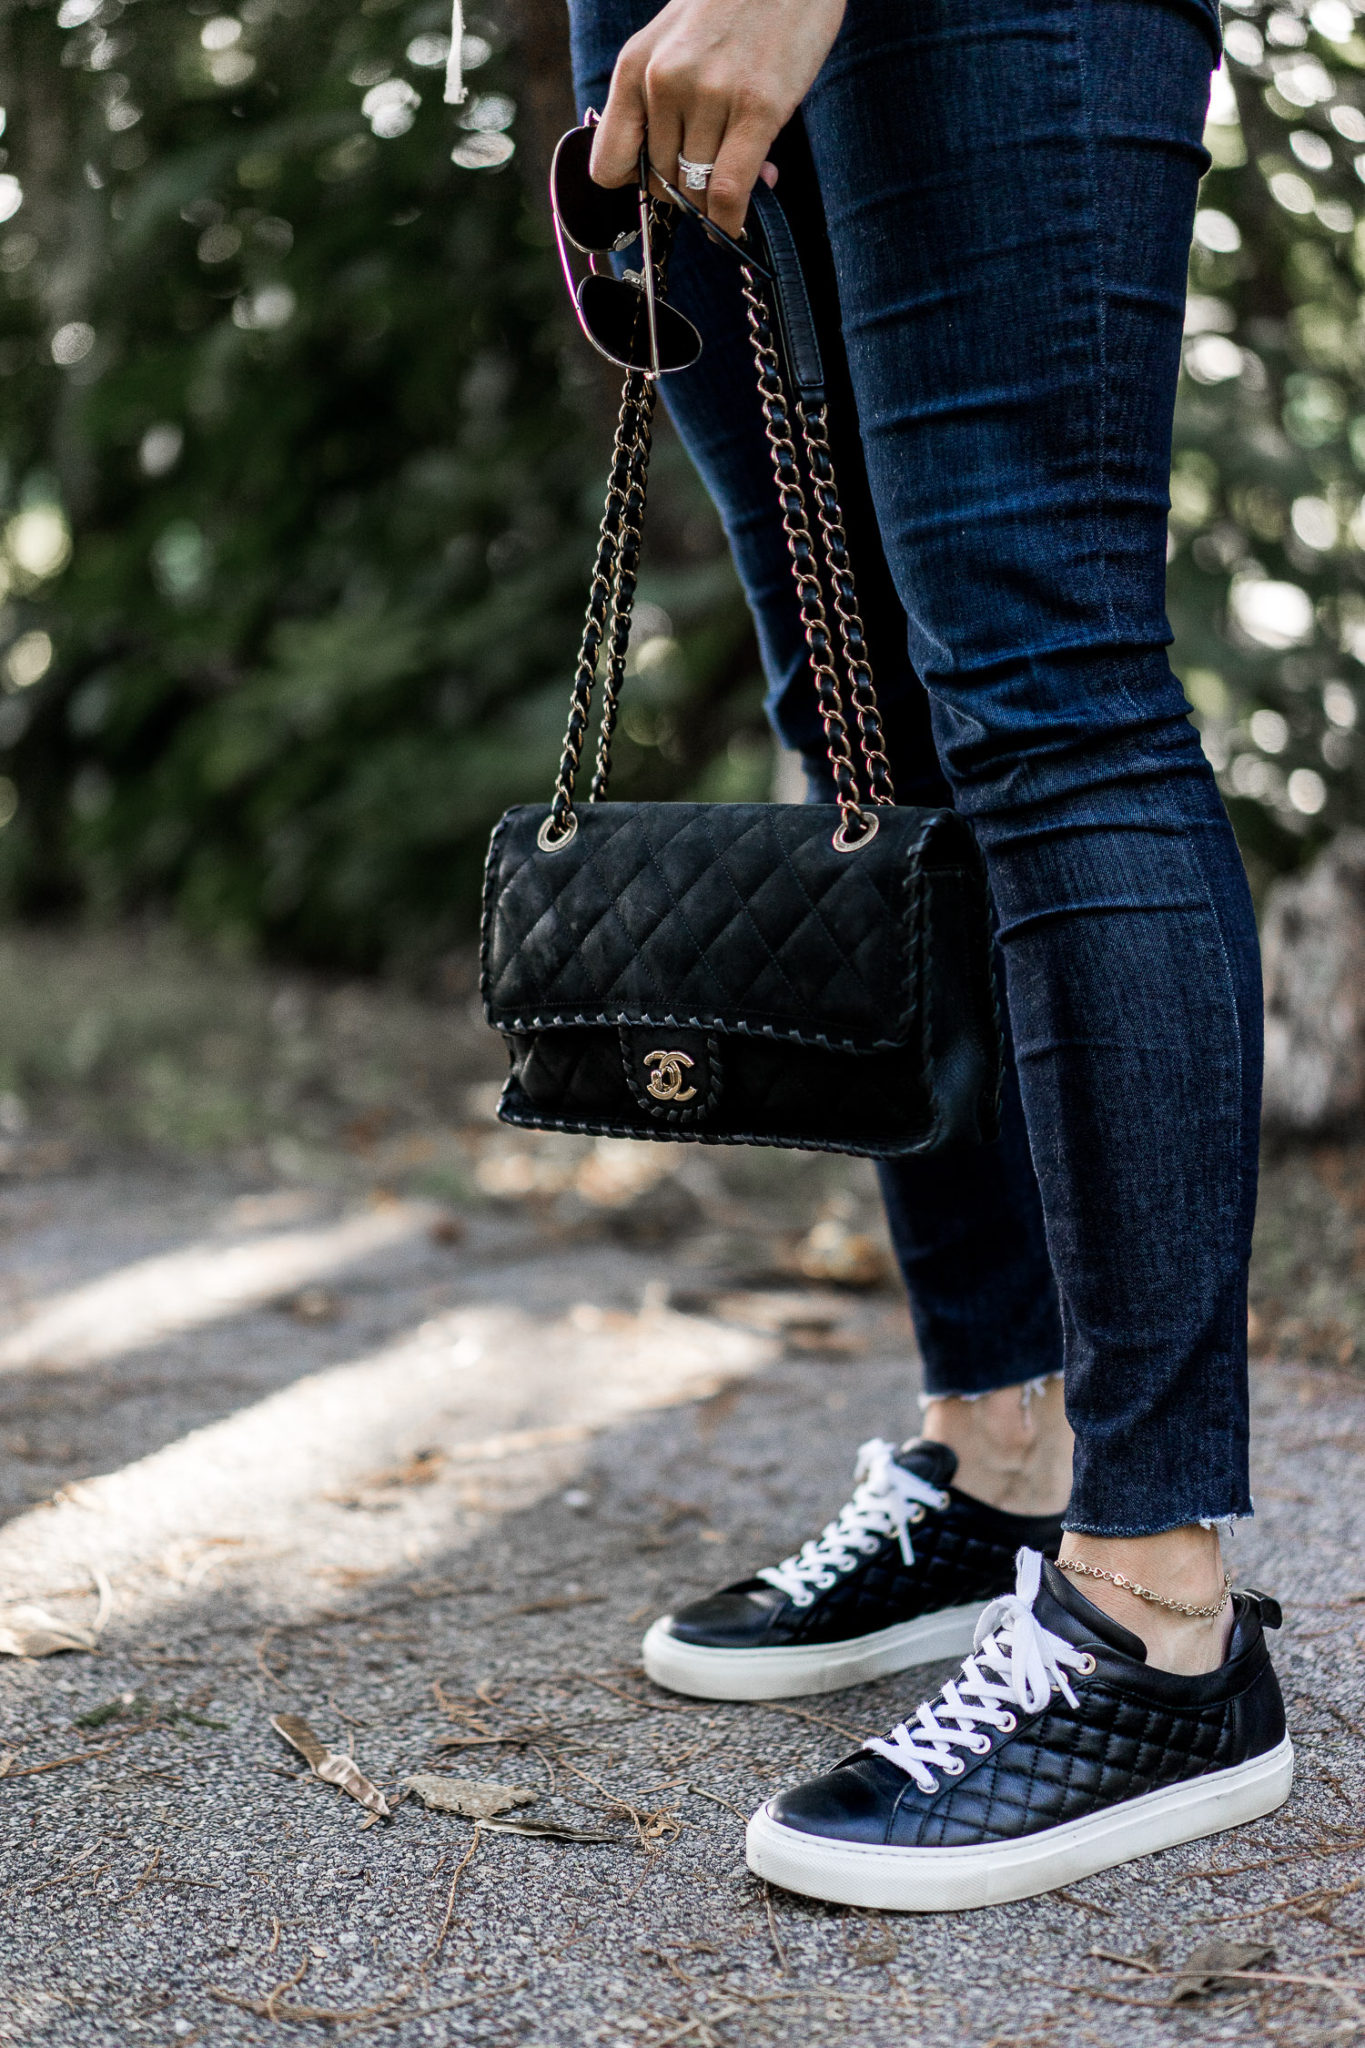 Amanda styles her M Gemi Palestra sneakers with her black Chanel bag and Rag and Bone denim.